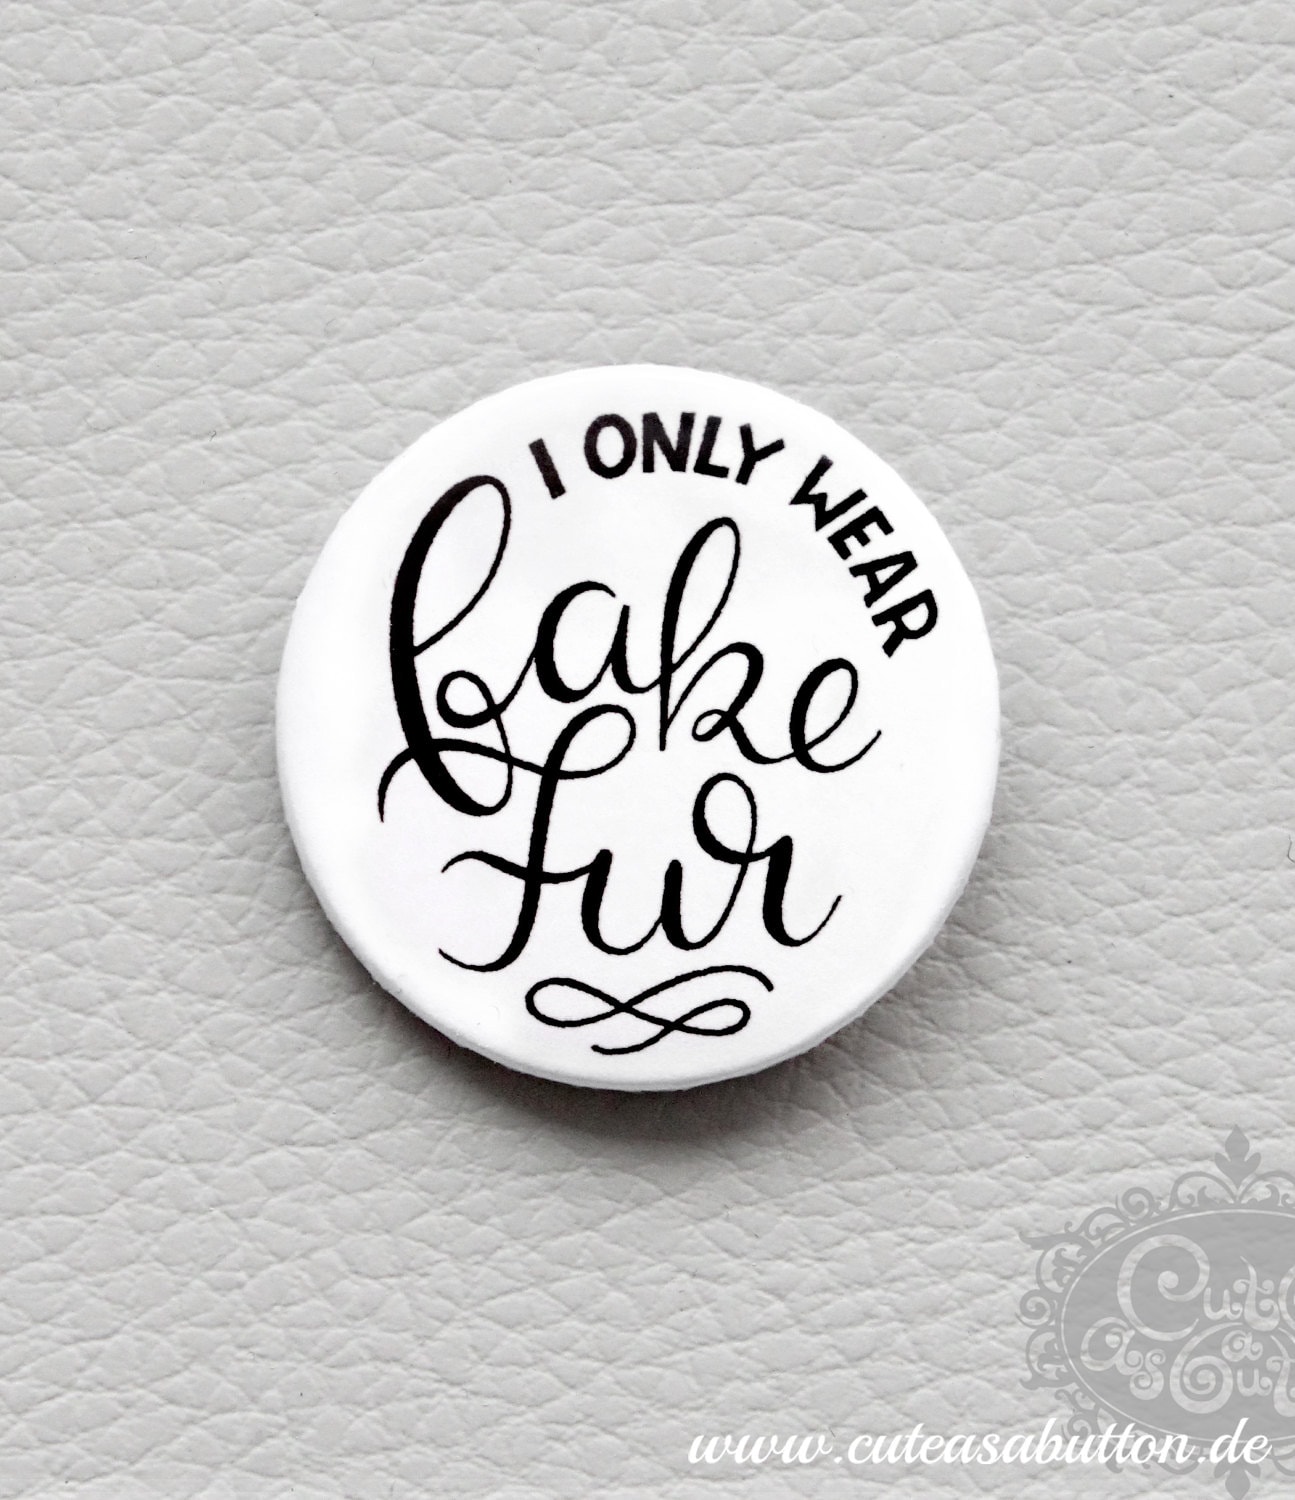 Vibrant Fun Buttons with Sayings